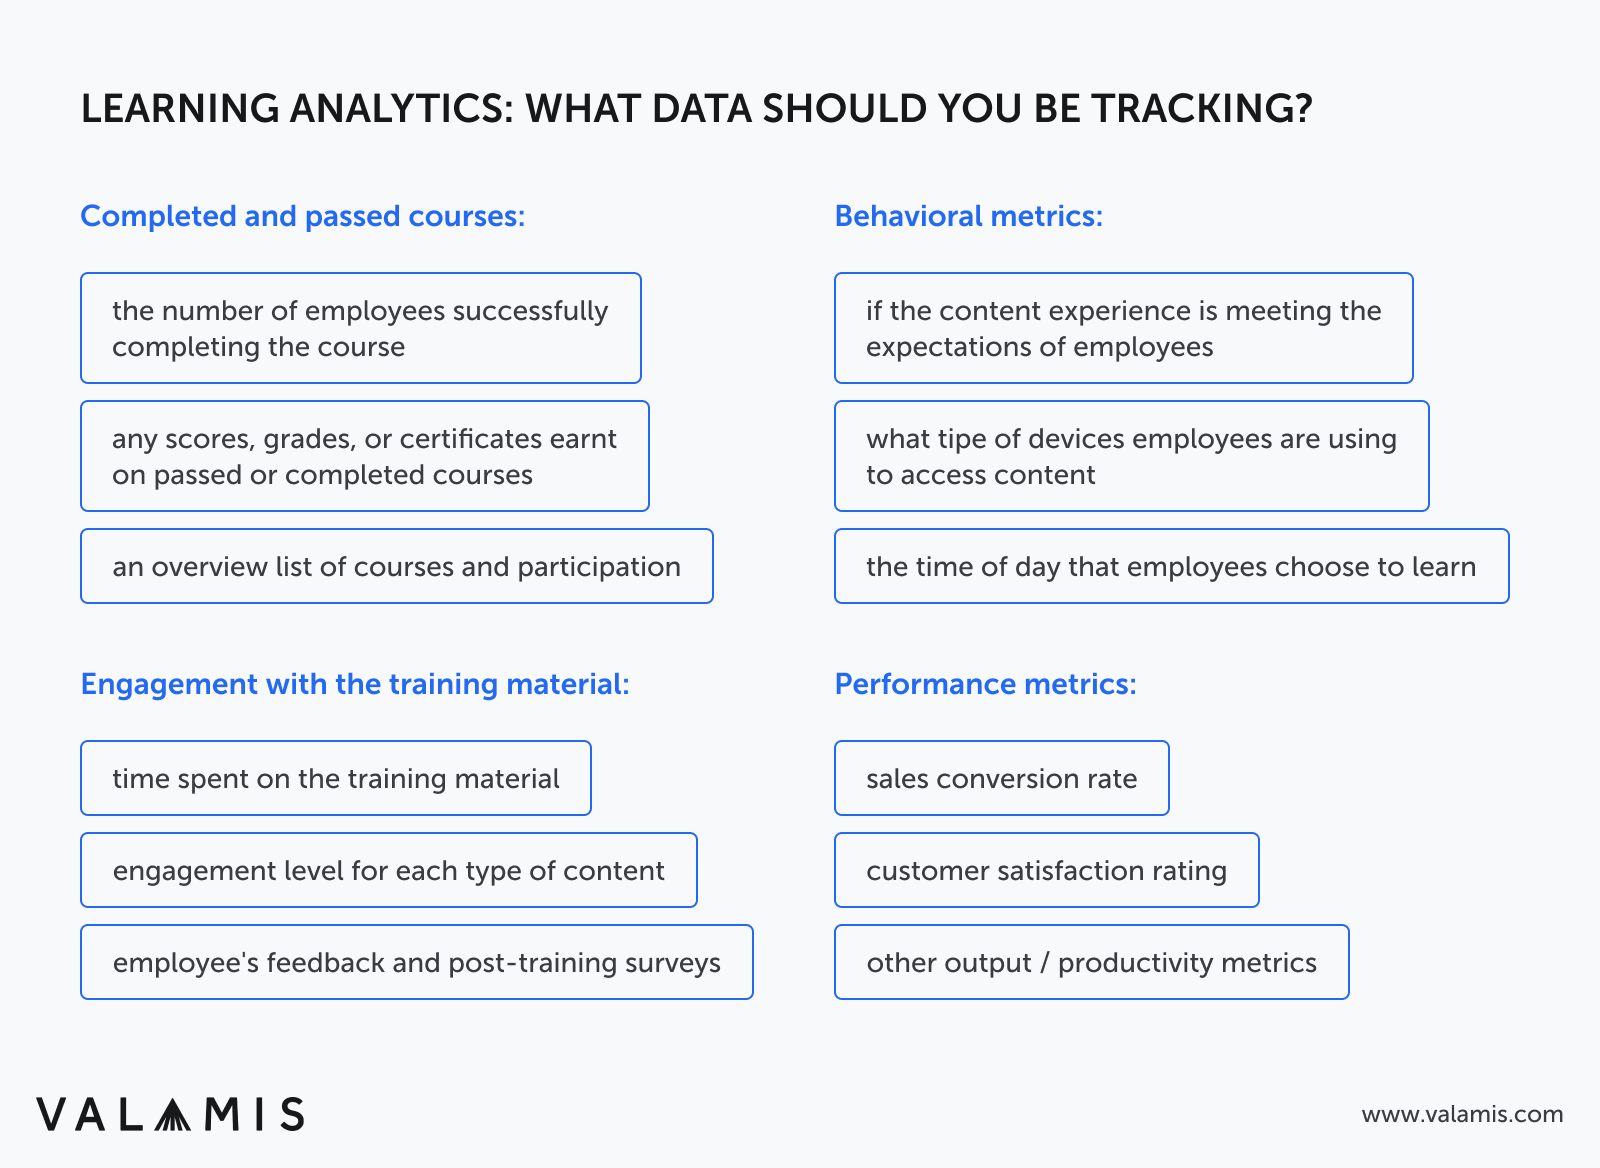 The list of data that each company should track